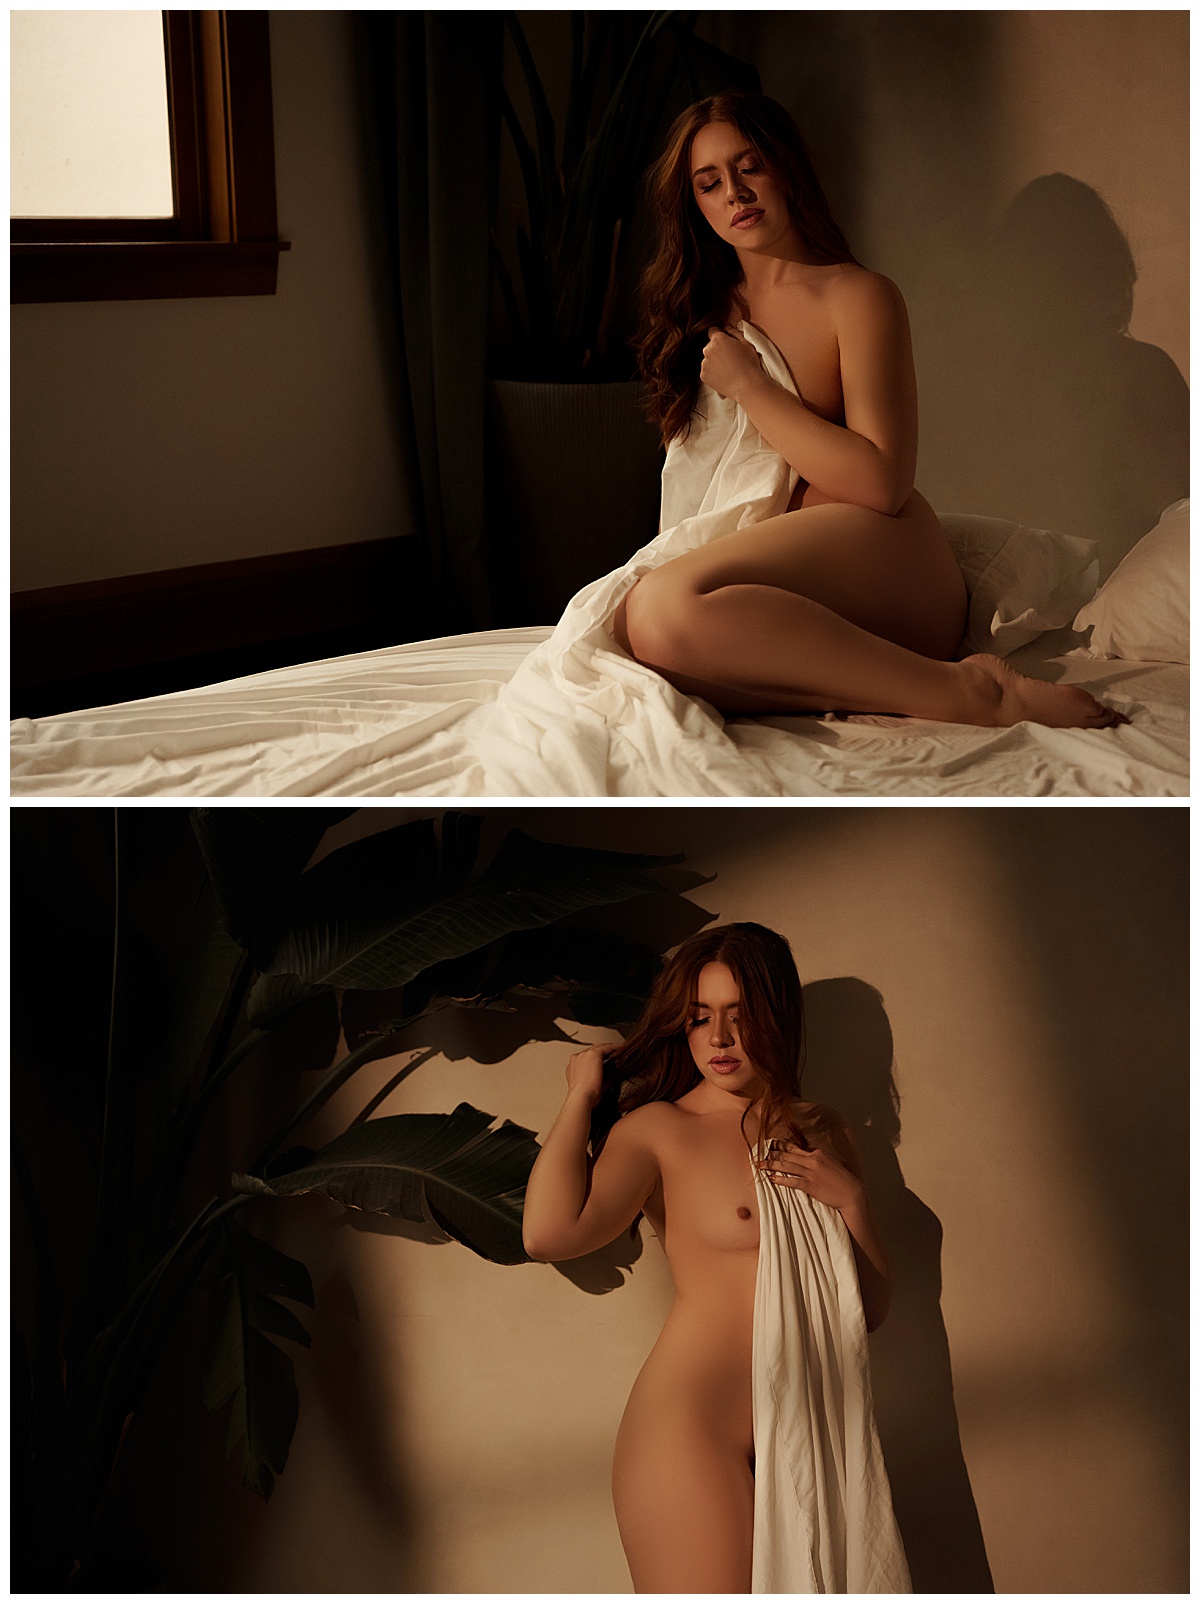 Female covers body with white sheet showing How to Feel Confident During Your Boudoir Photoshoot